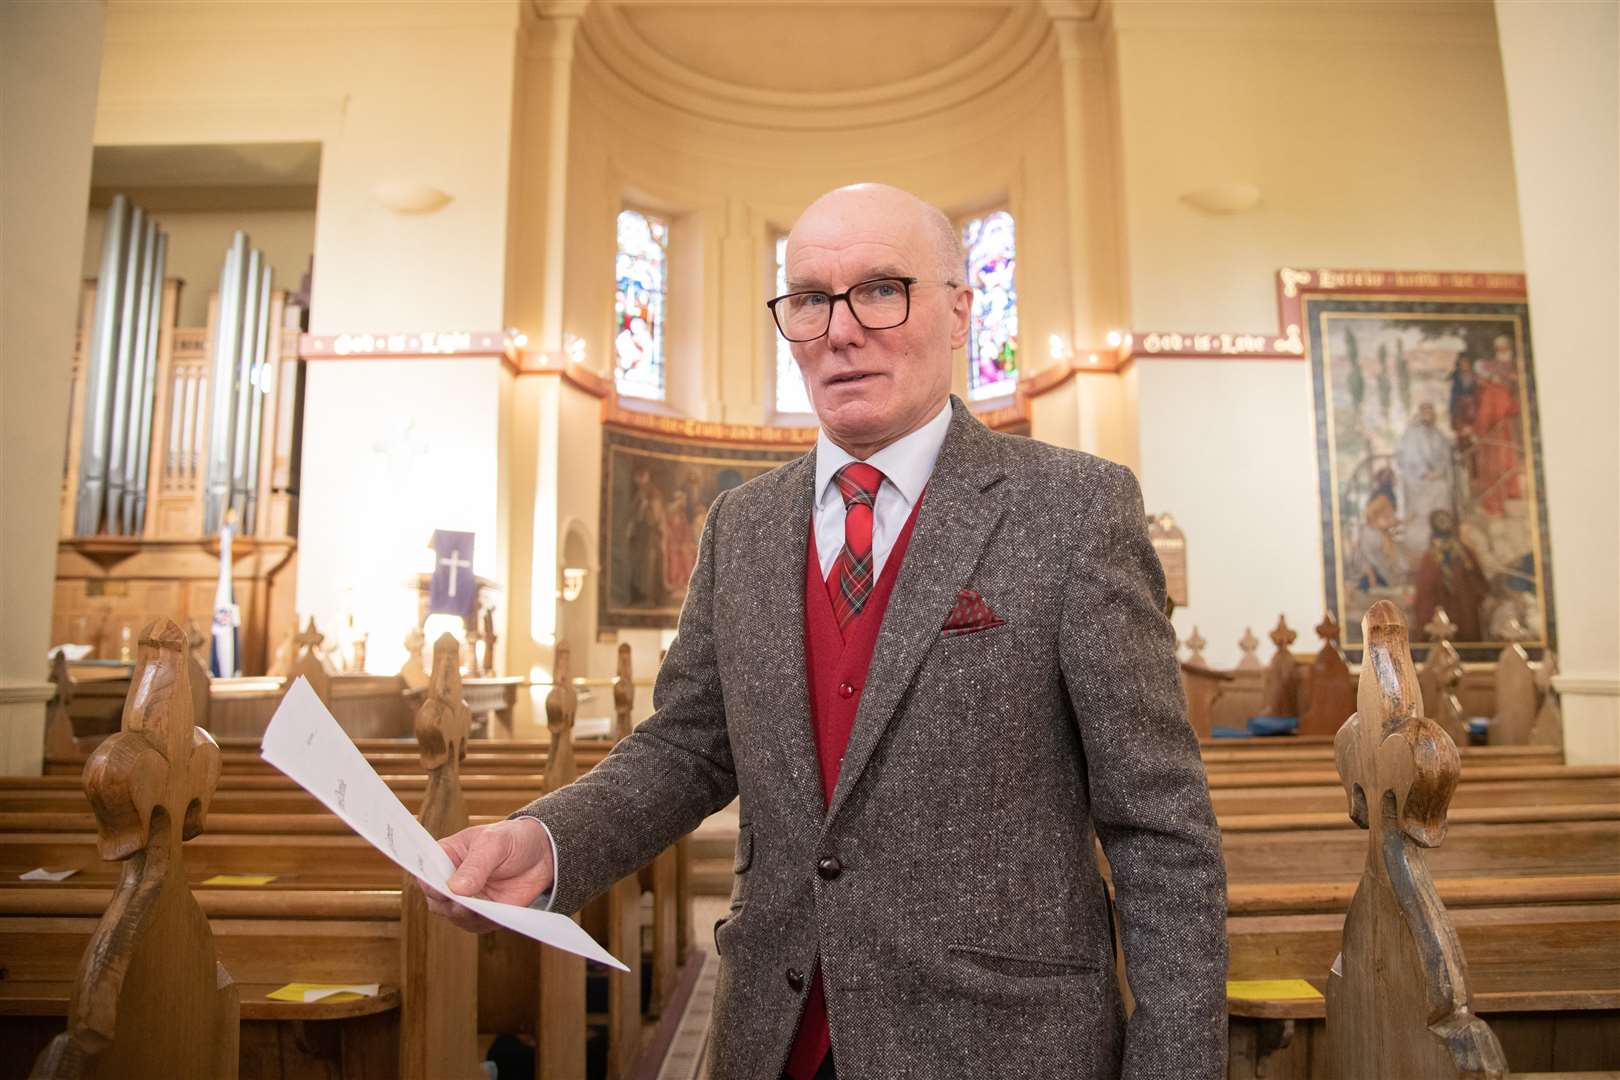 Brian Smith is looking forward to the concert at St John's Church.  Photo: Daniel Forsyth.